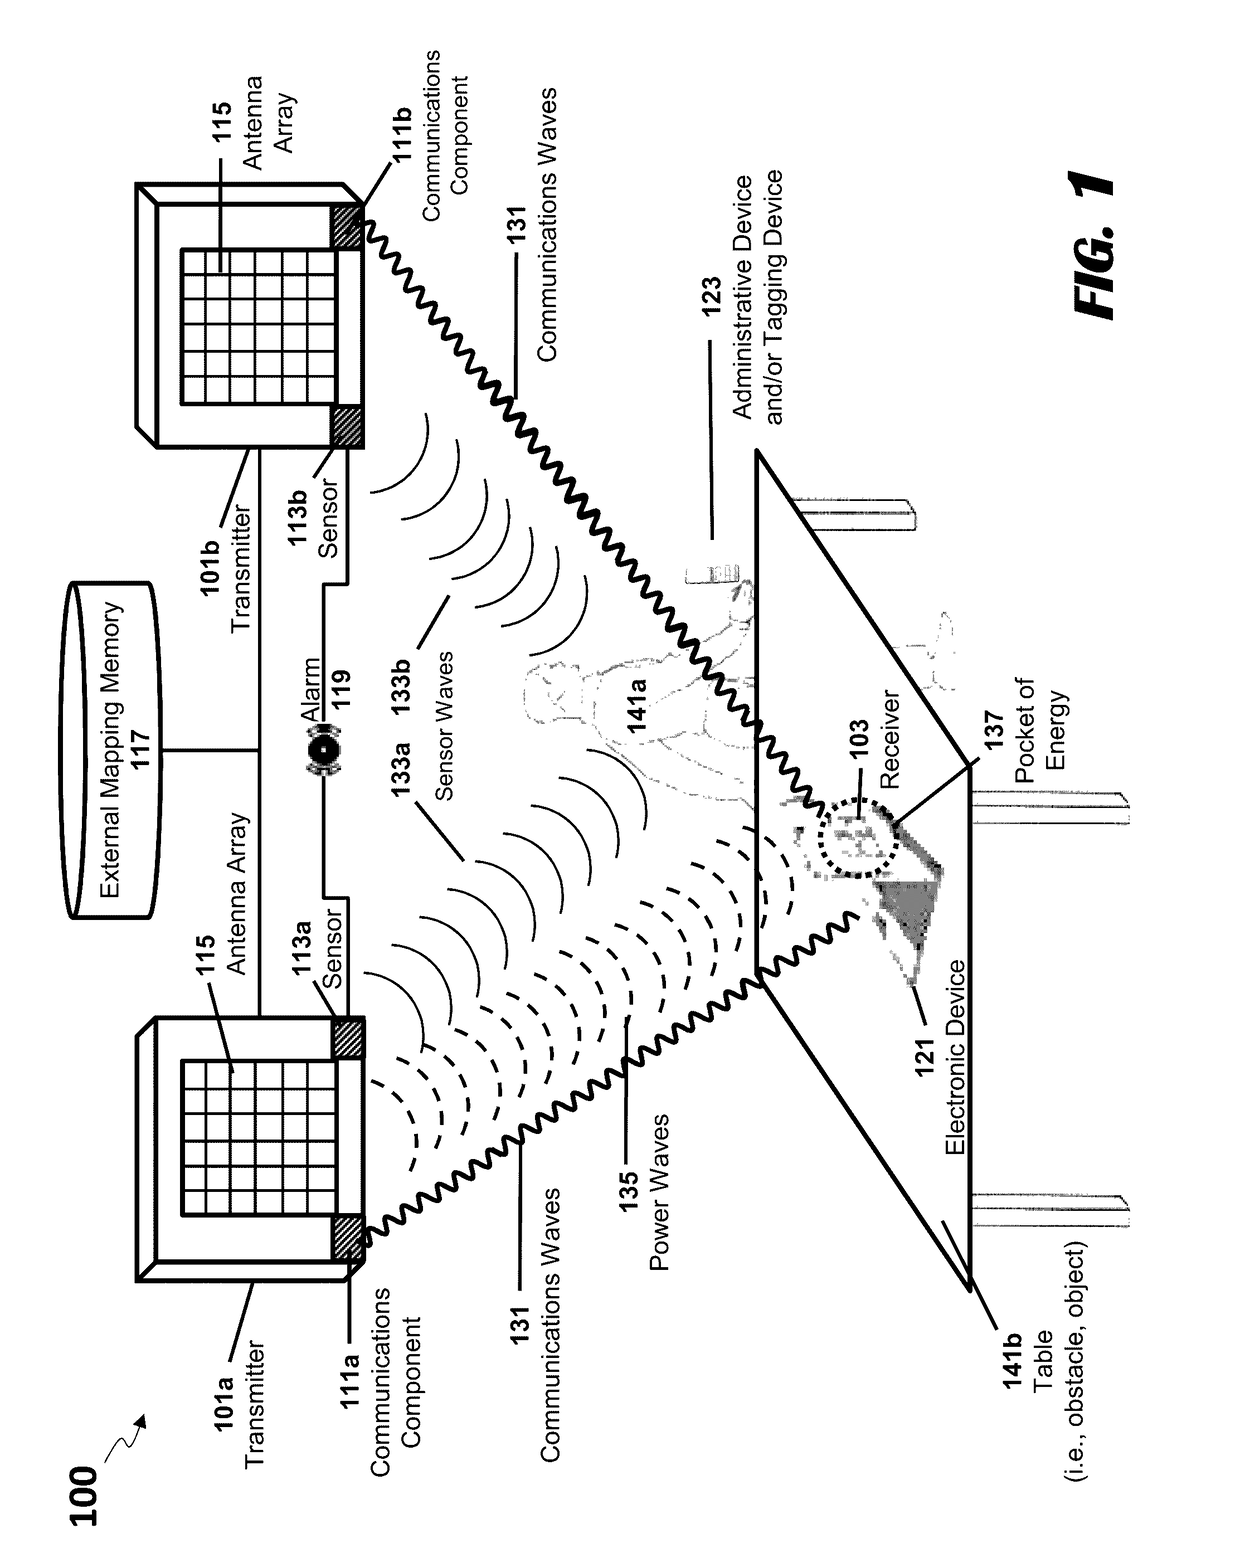 Systems and methods for identifying sensitive objects in a wireless charging transmission field